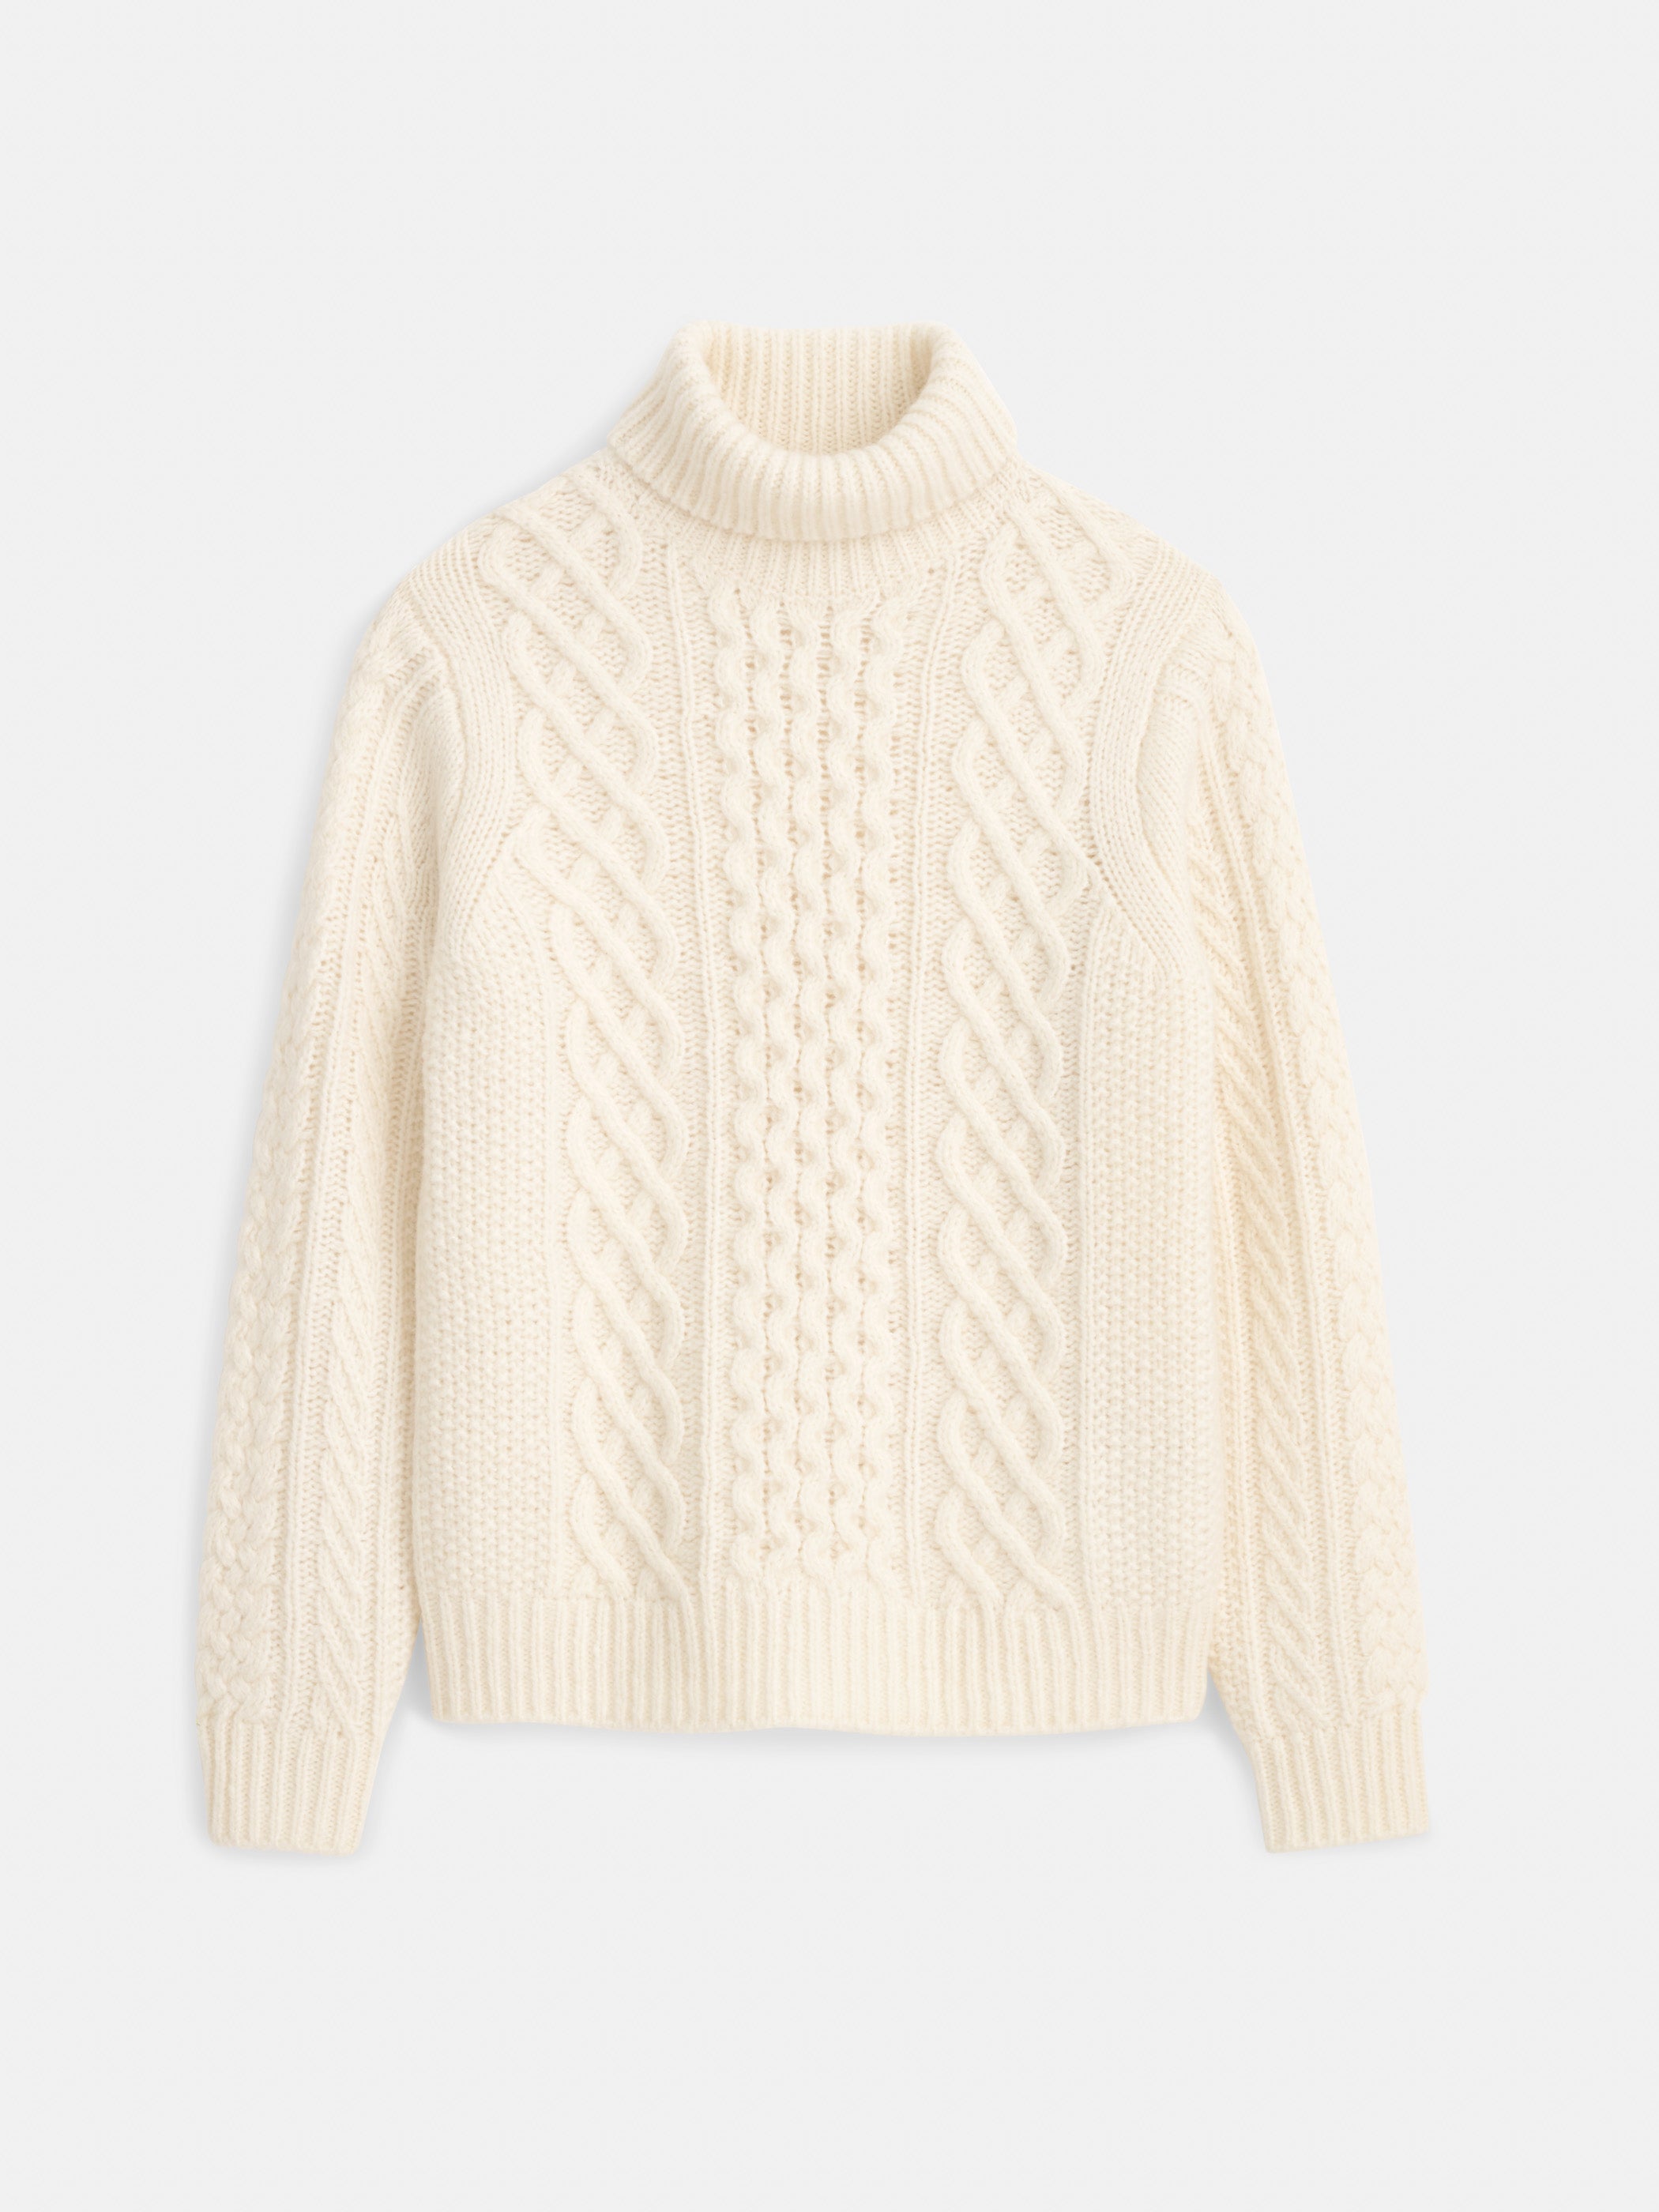 ALEX MILL FISHERMAN CABLE TURTLENECK SWEATER